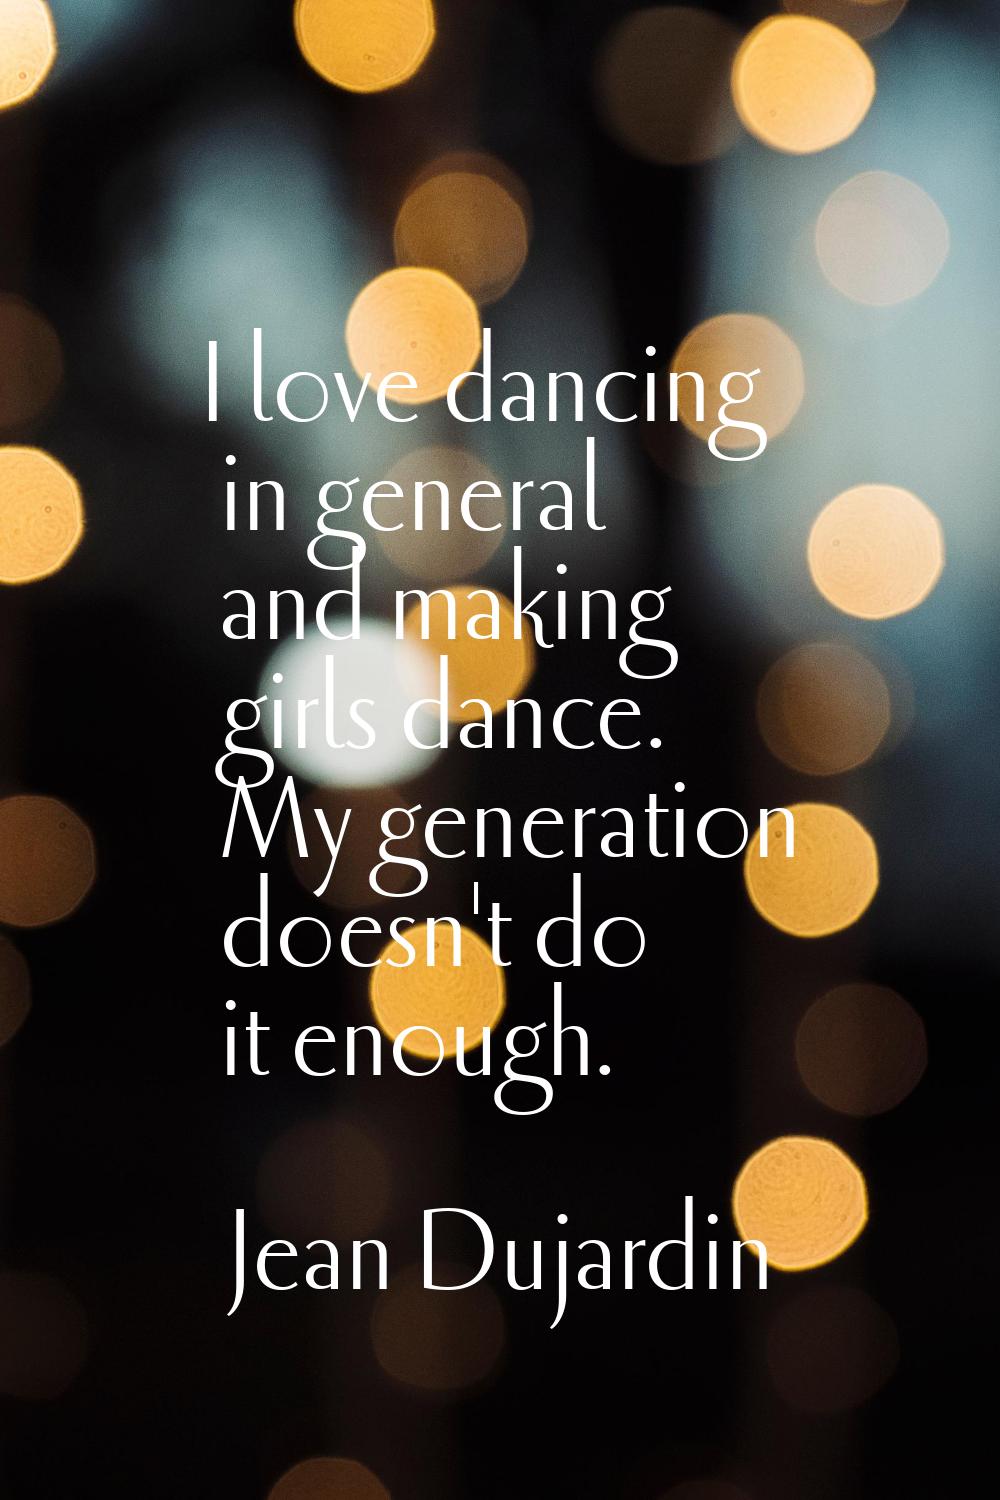 I love dancing in general and making girls dance. My generation doesn't do it enough.